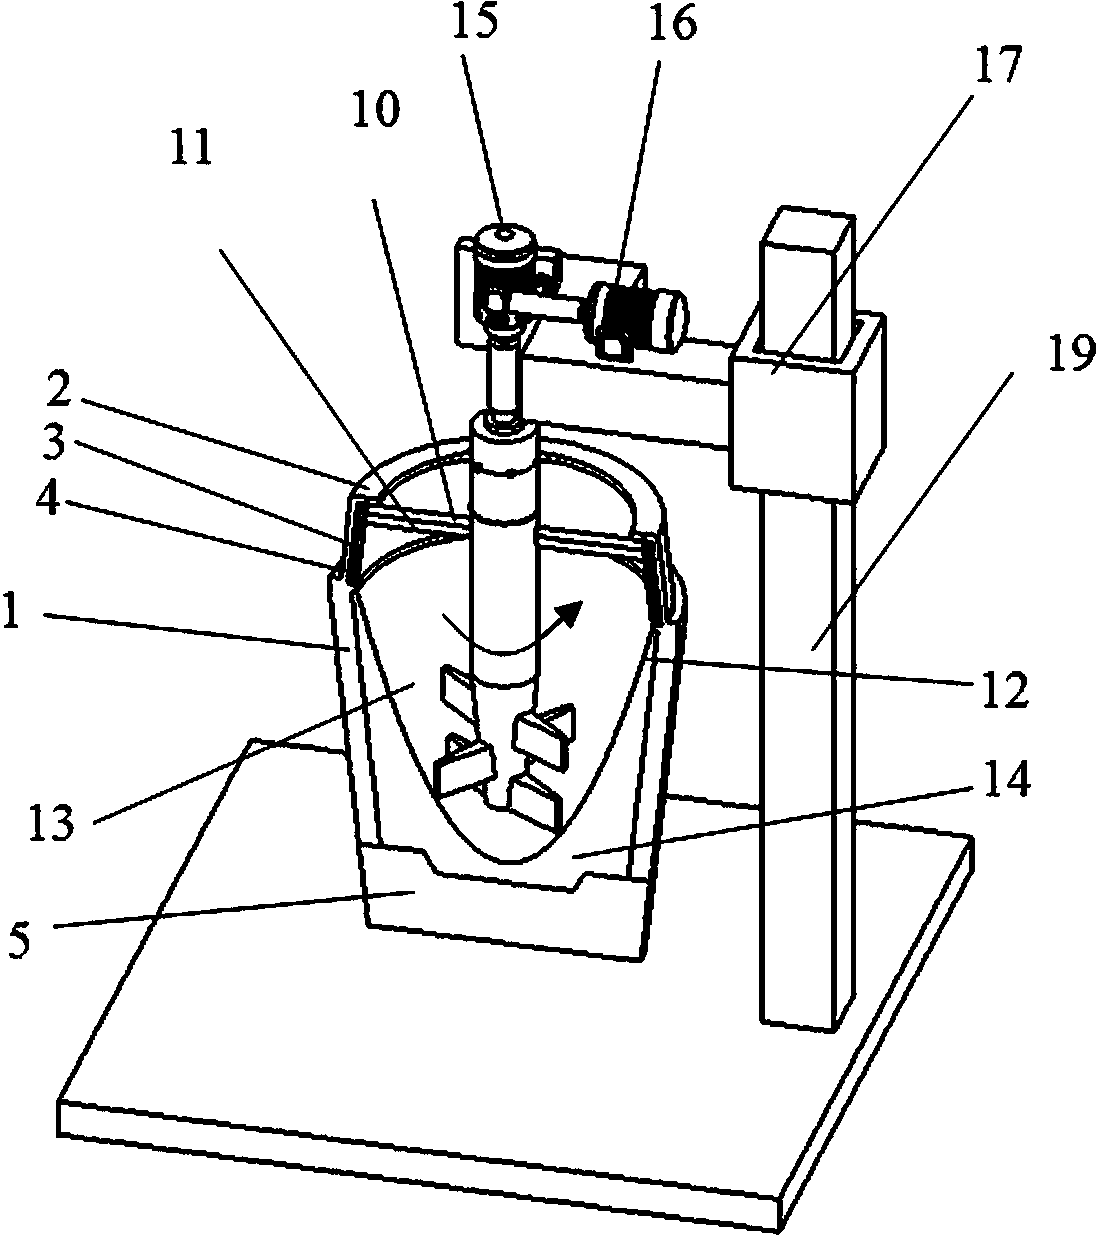 Device and method for preparing large-size homogeneous steel ingot by stirring with self-consuming stirrer